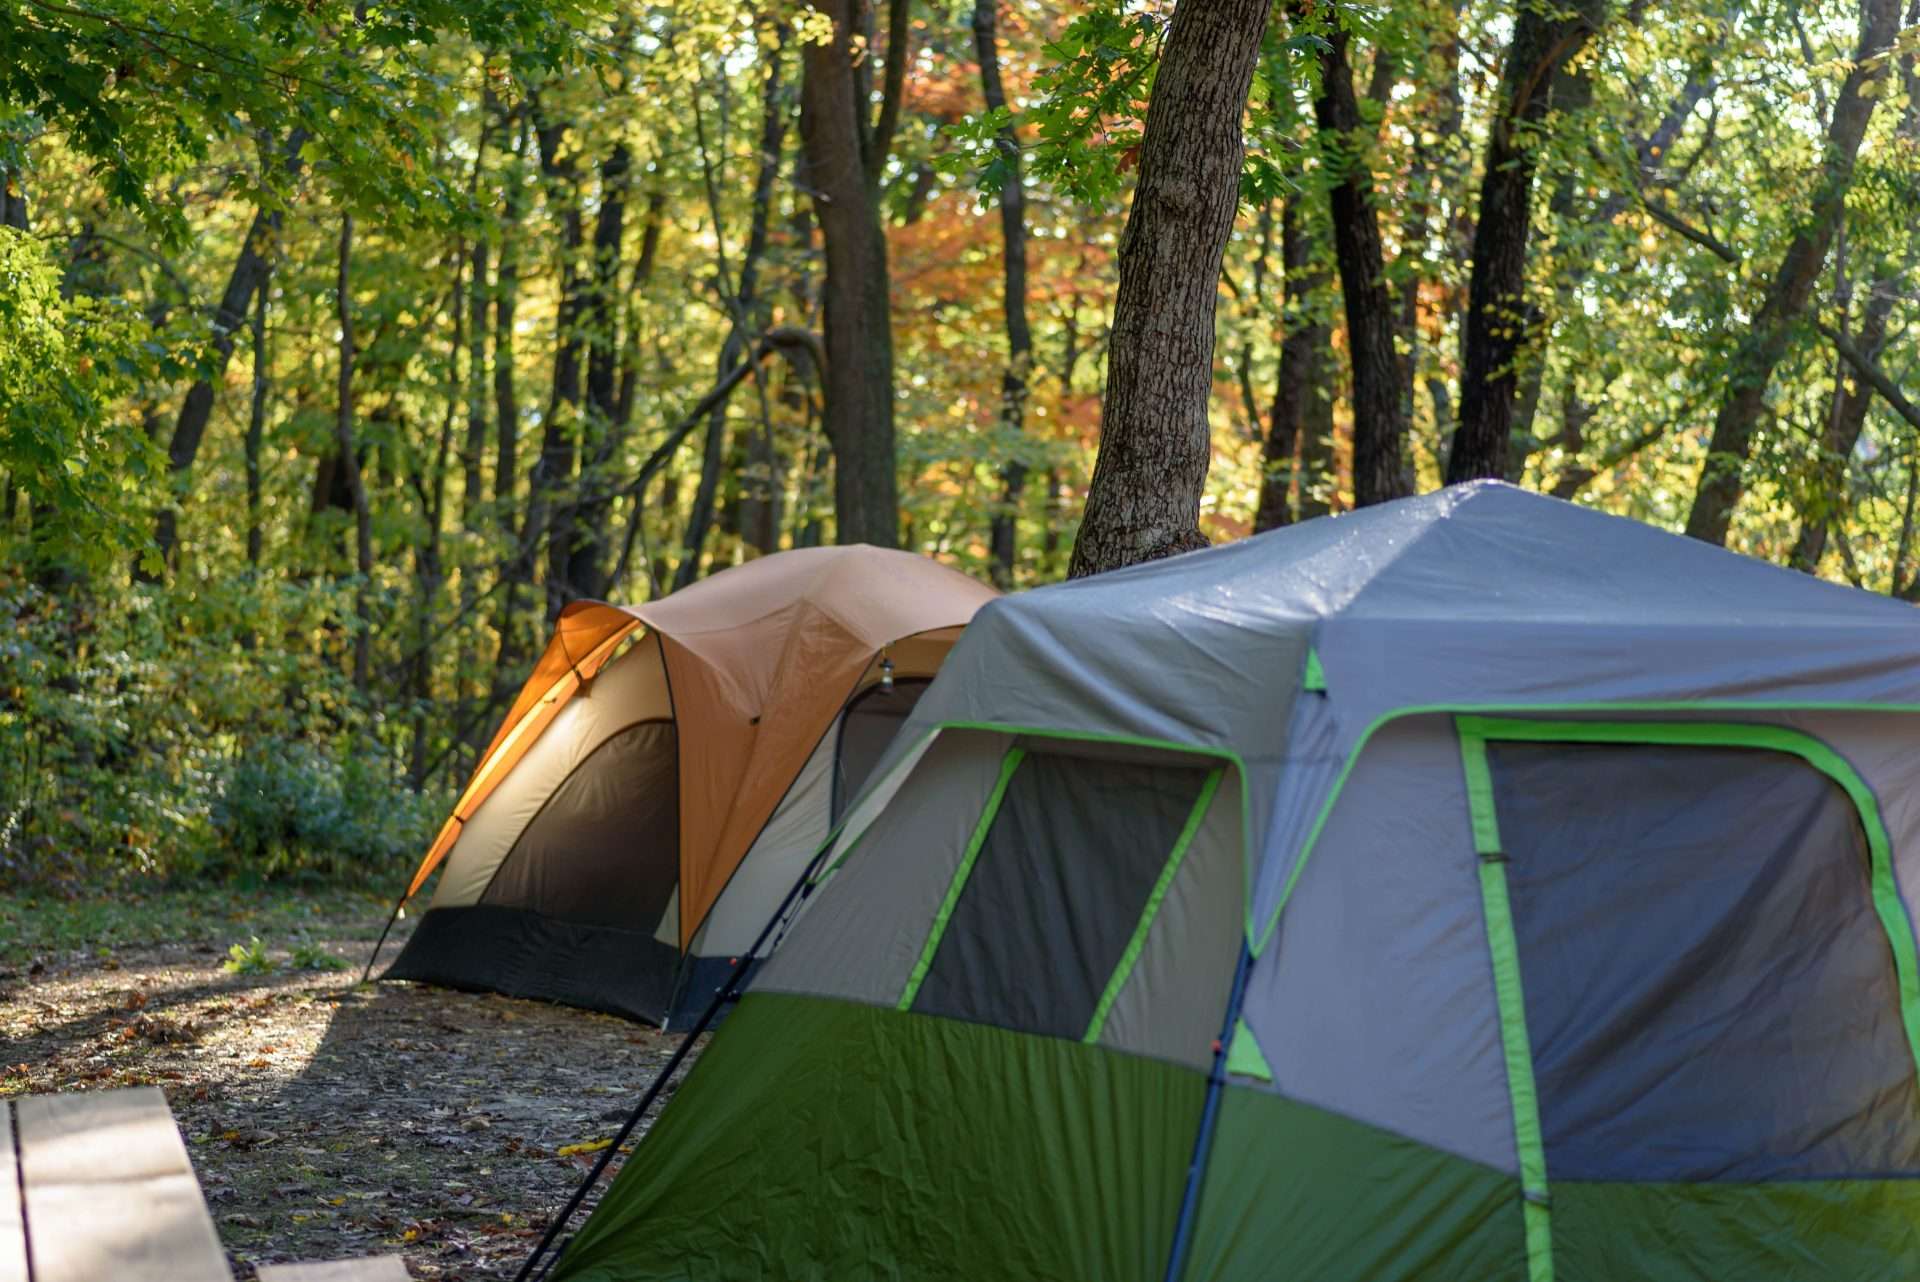 Tent camping in October